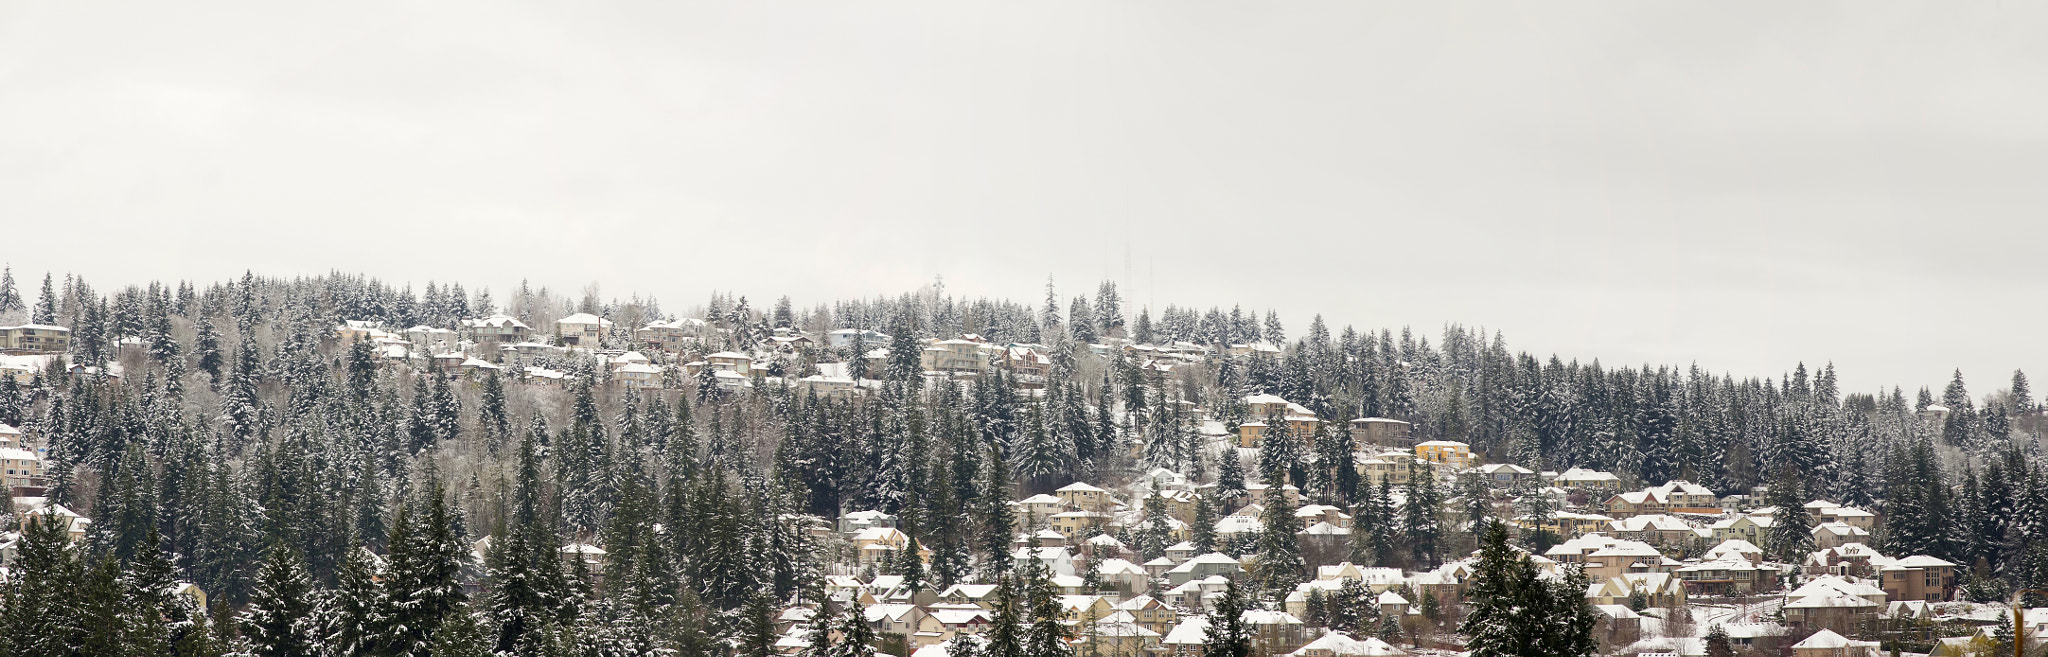 Houses on the Mountain in Winter